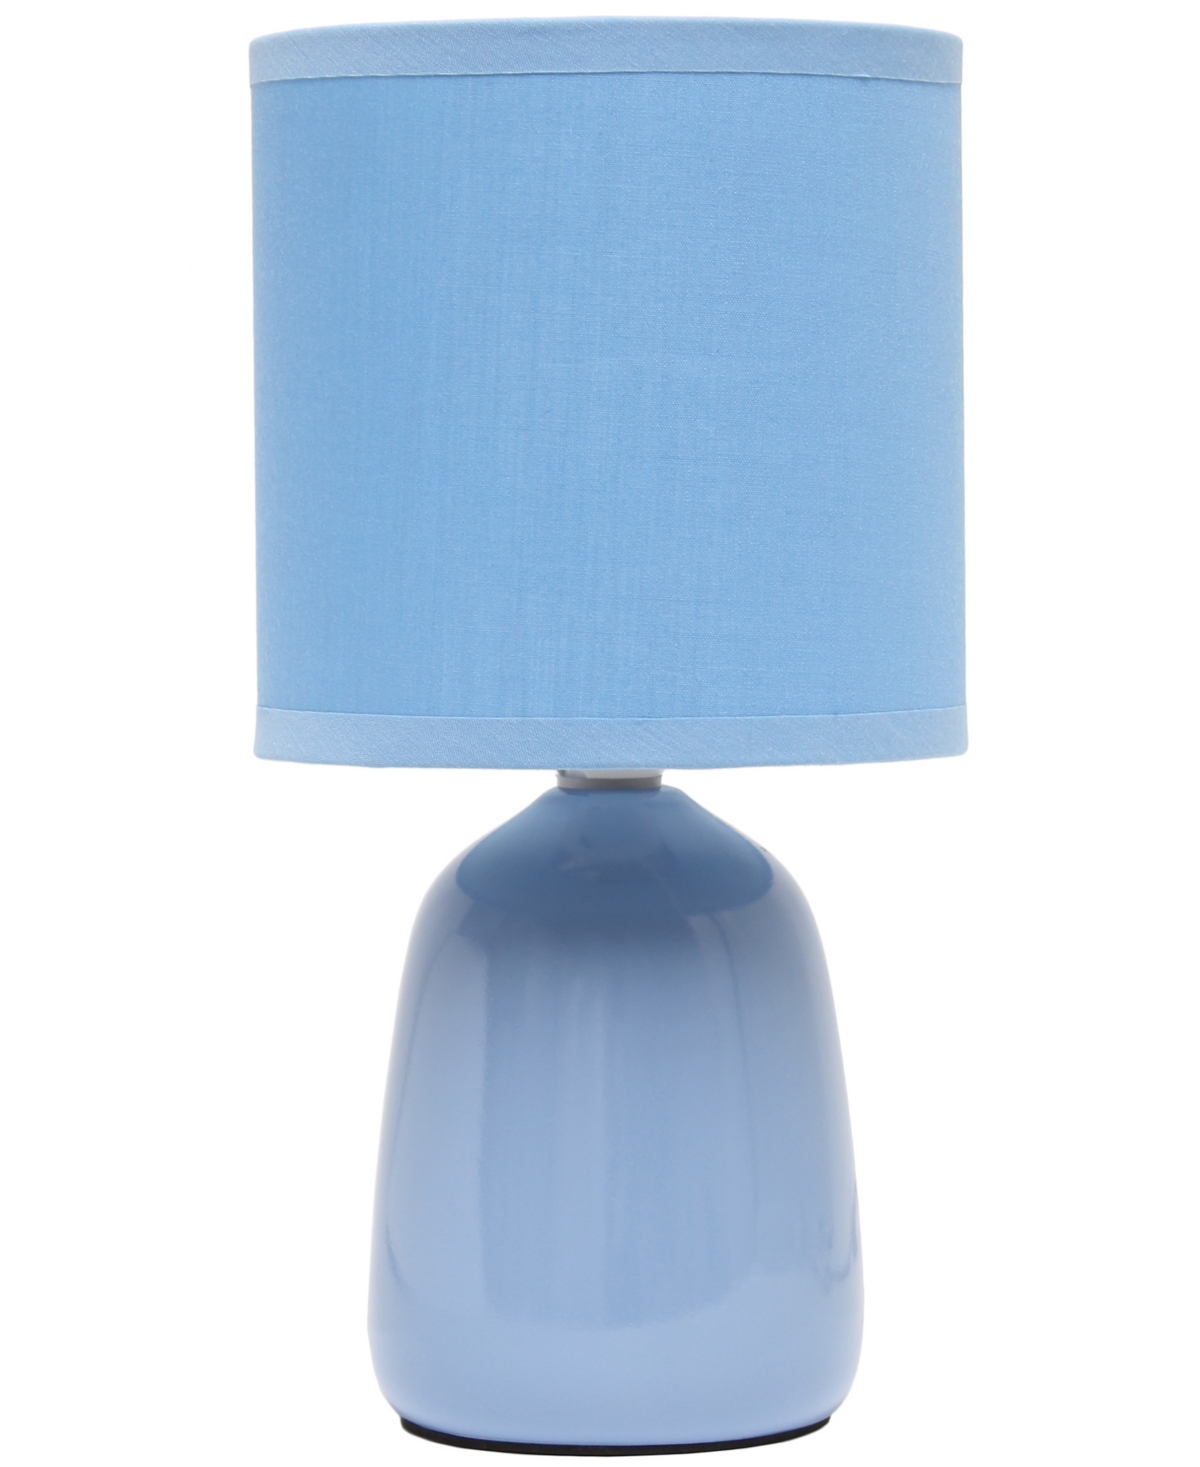 Shop Simple Designs 10.04" Tall Traditional Ceramic Thimble Base Bedside Table Desk Lamp With Matching Fabric Shade In Sky Blue